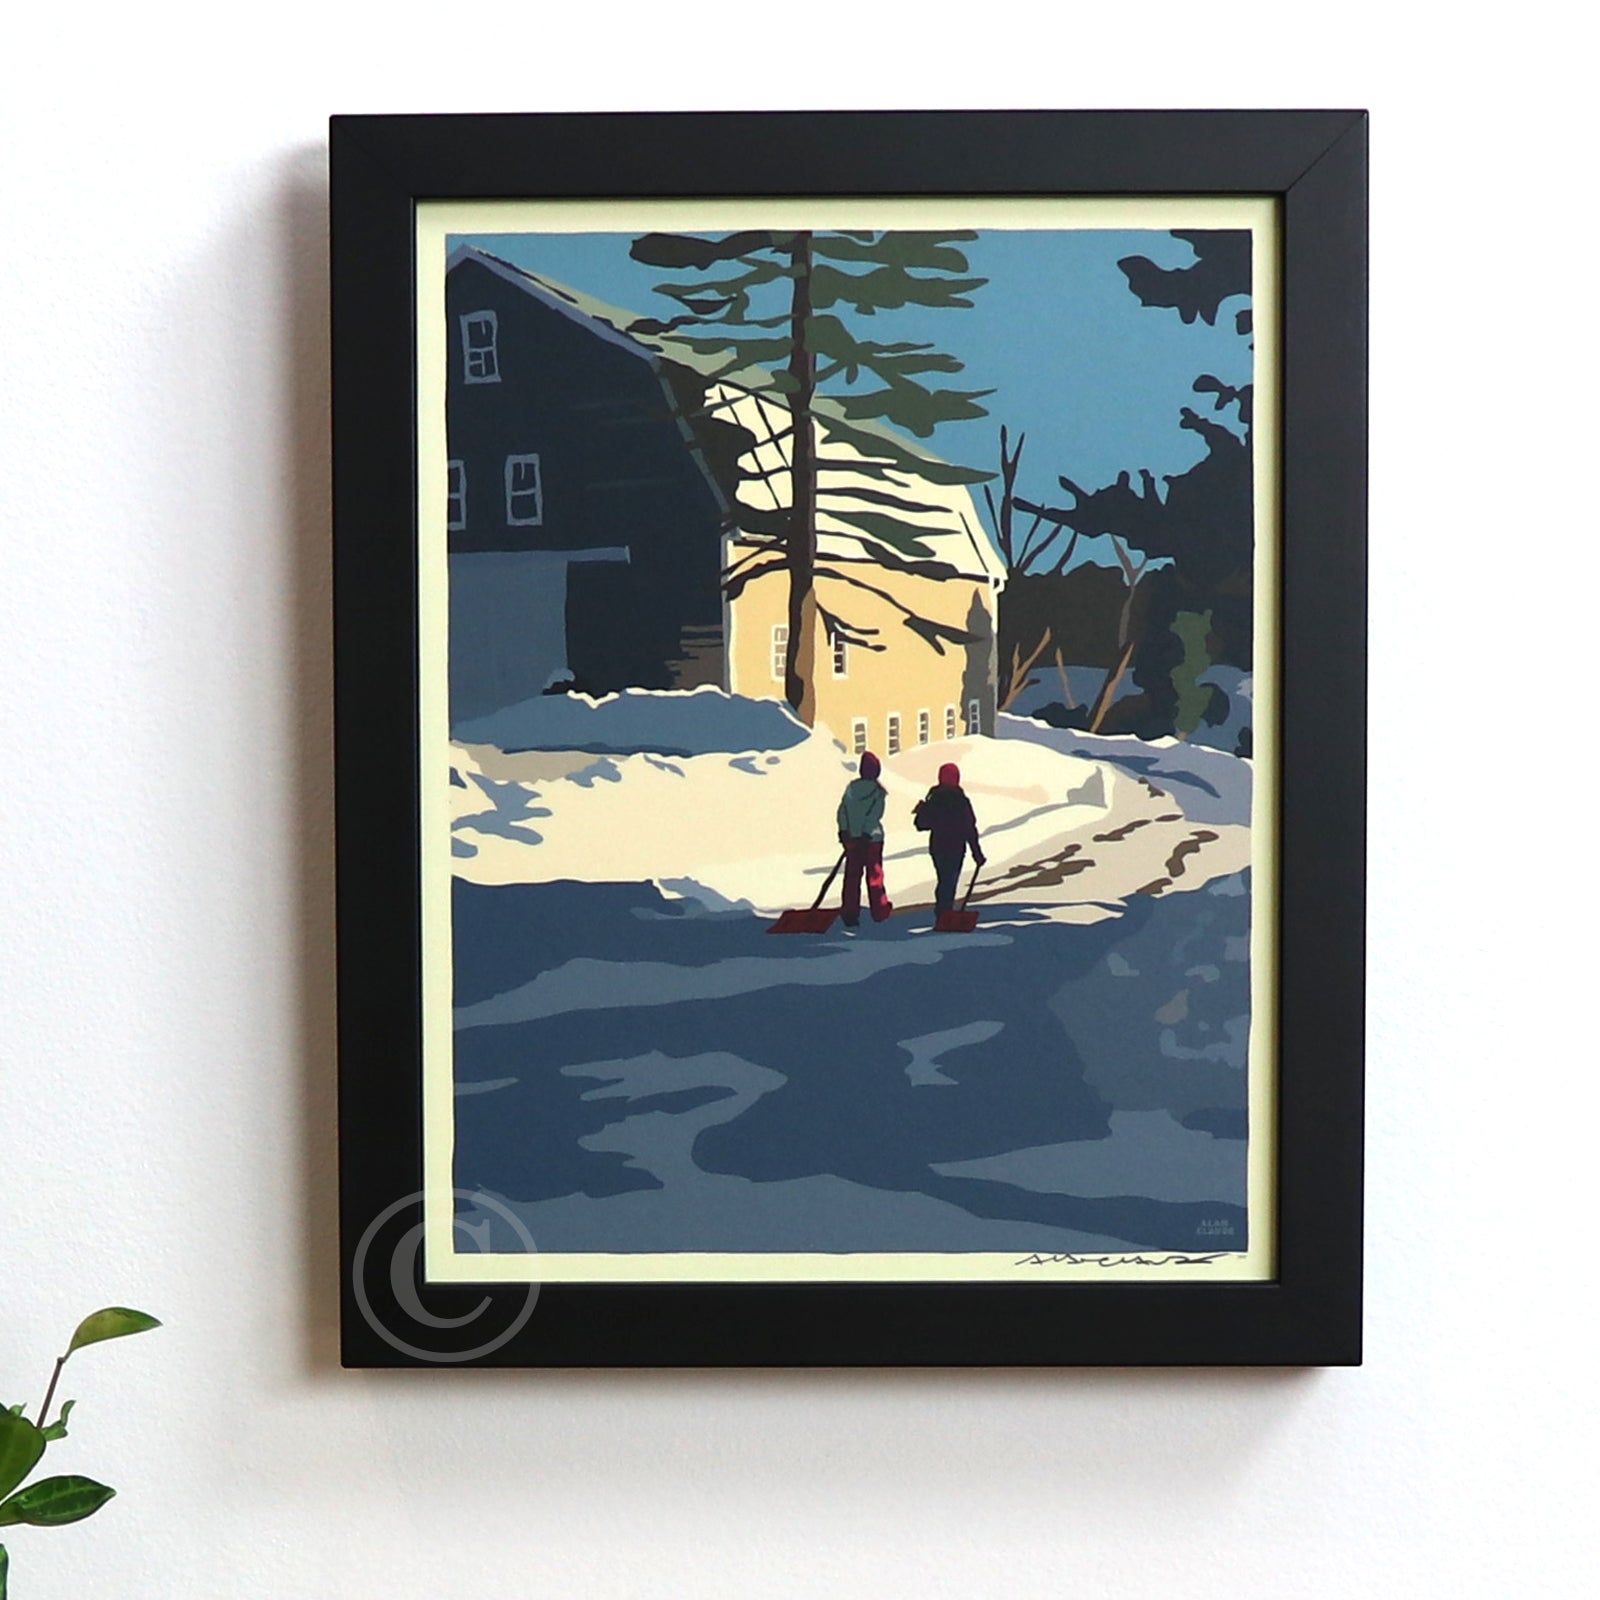 Winter Chores Art Print 8" x 10" Framed Wall Poster By Alan Claude - Maine